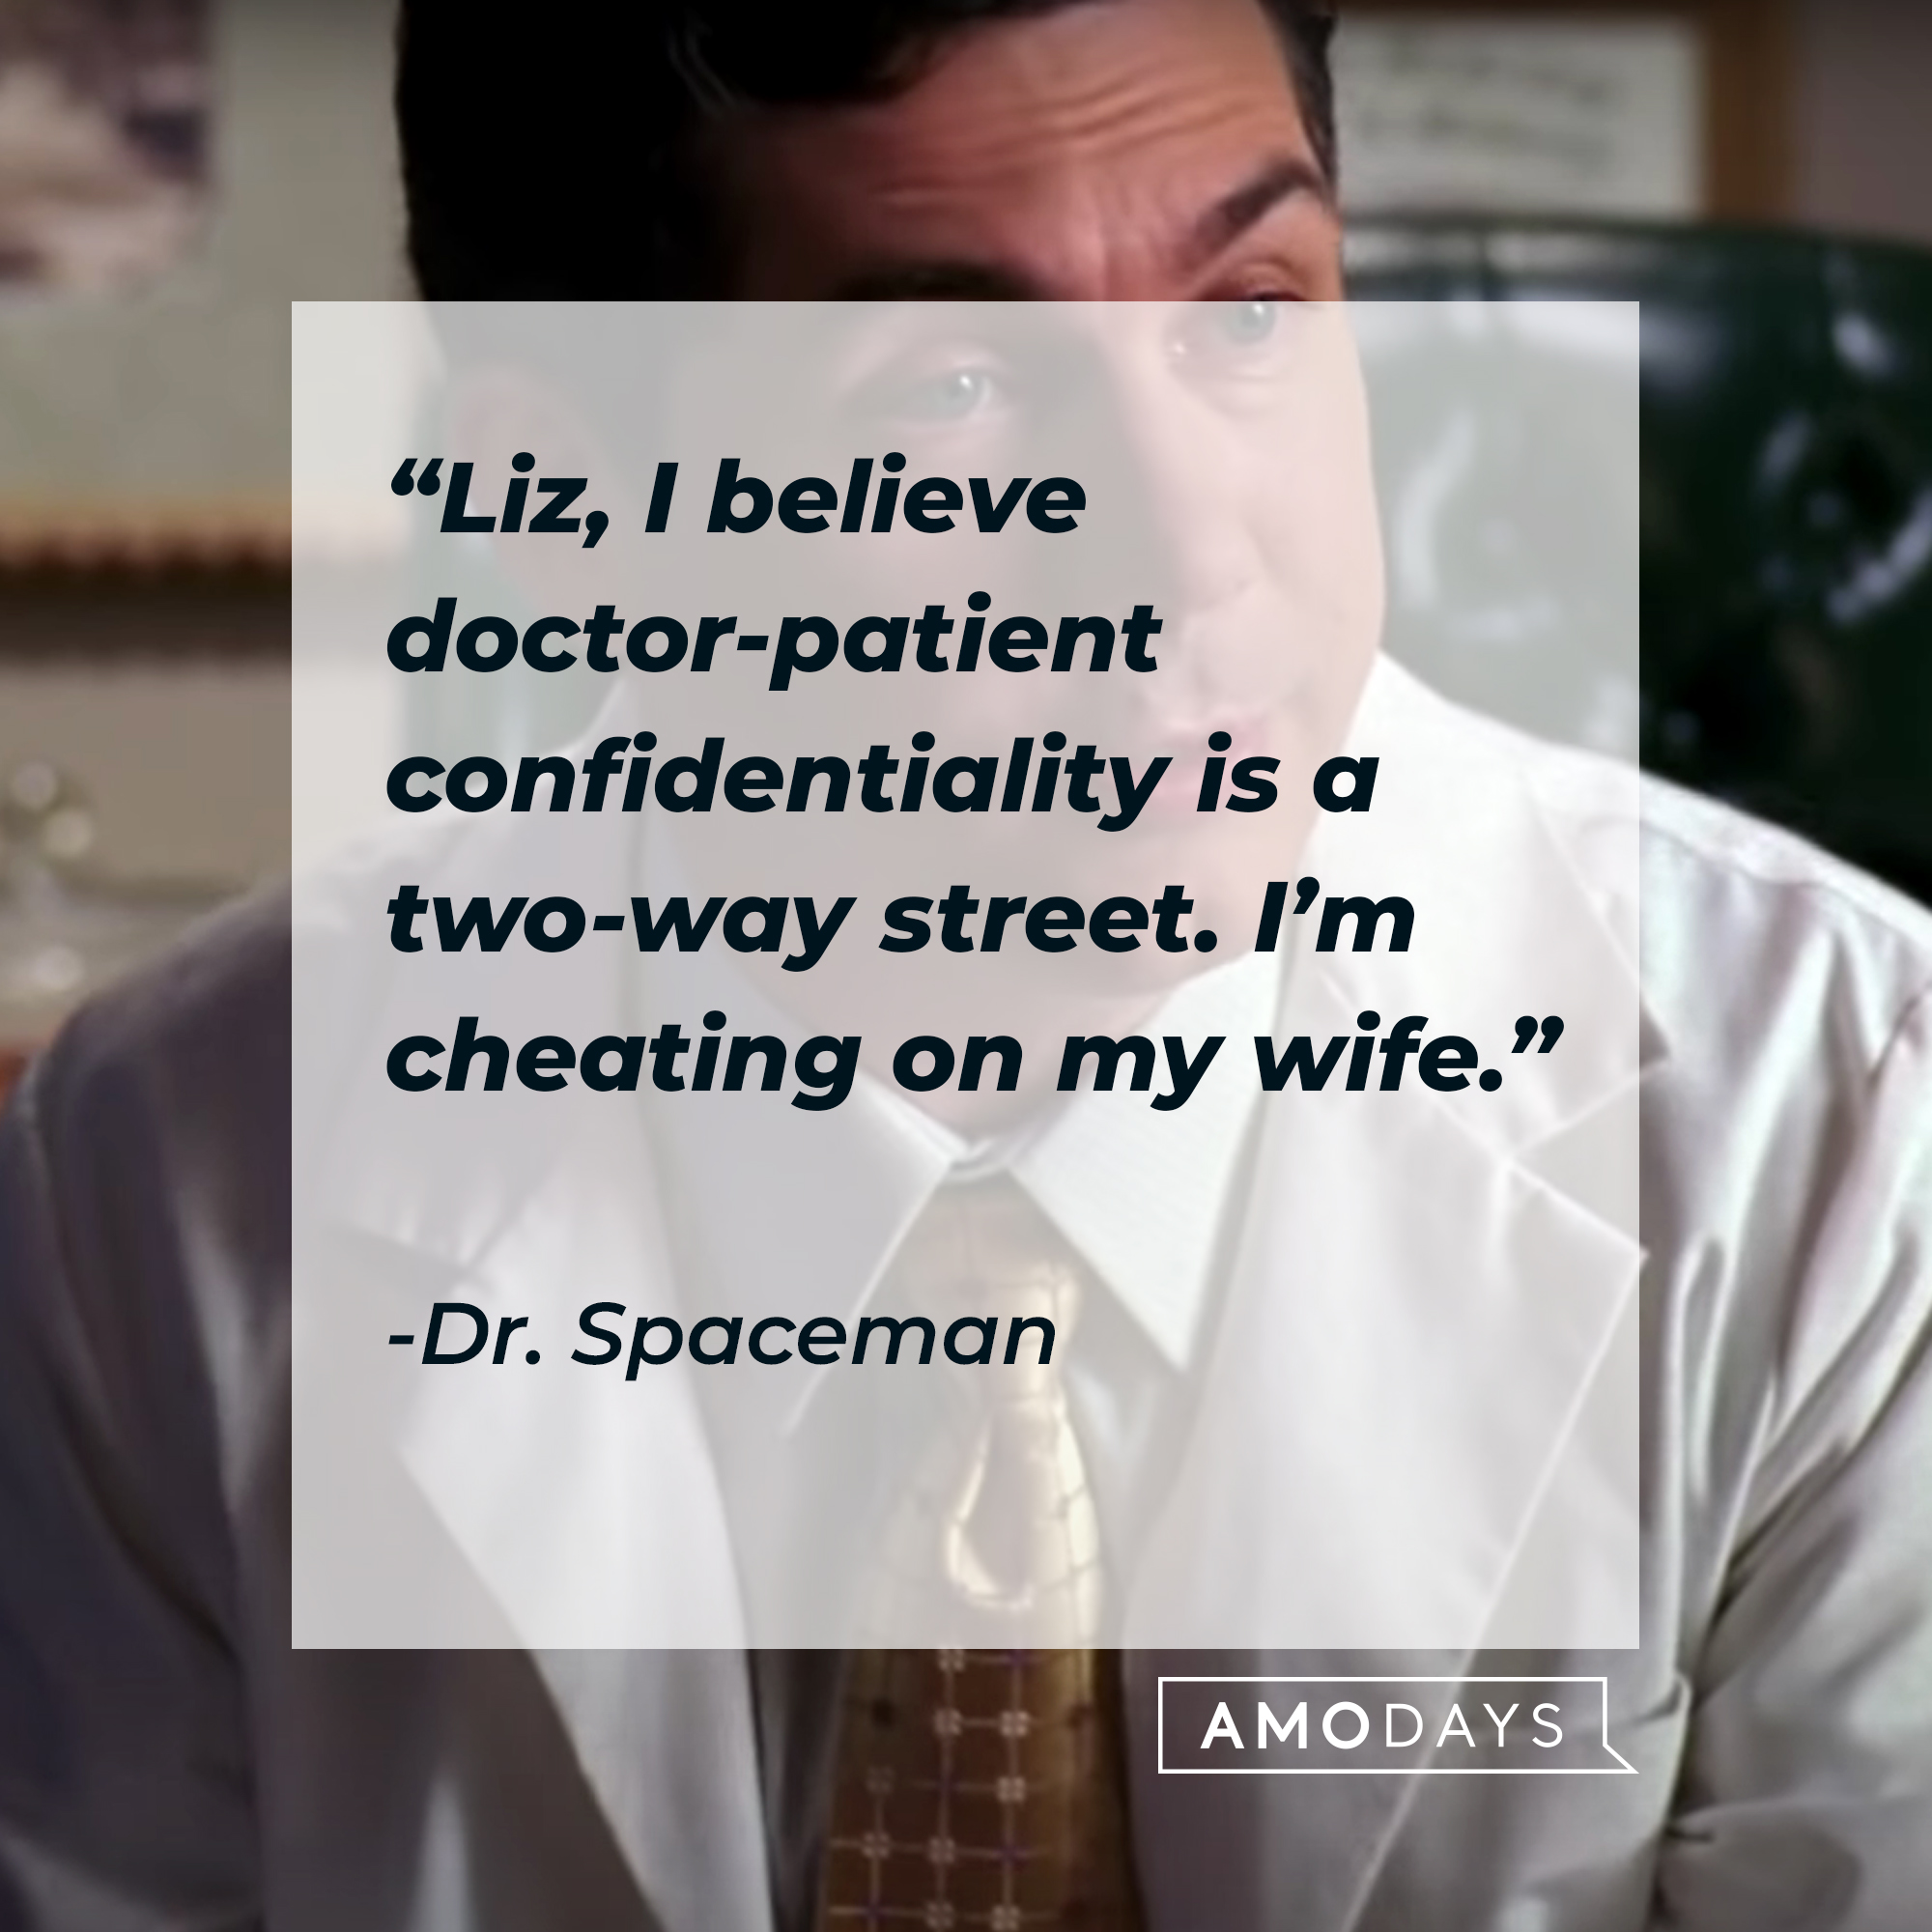 Dr. Spaceman's quote: "Liz, I believe doctor-patient confidentiality is a two-way street. I'm cheating on my wife." | Source: youtube.com/30Rock